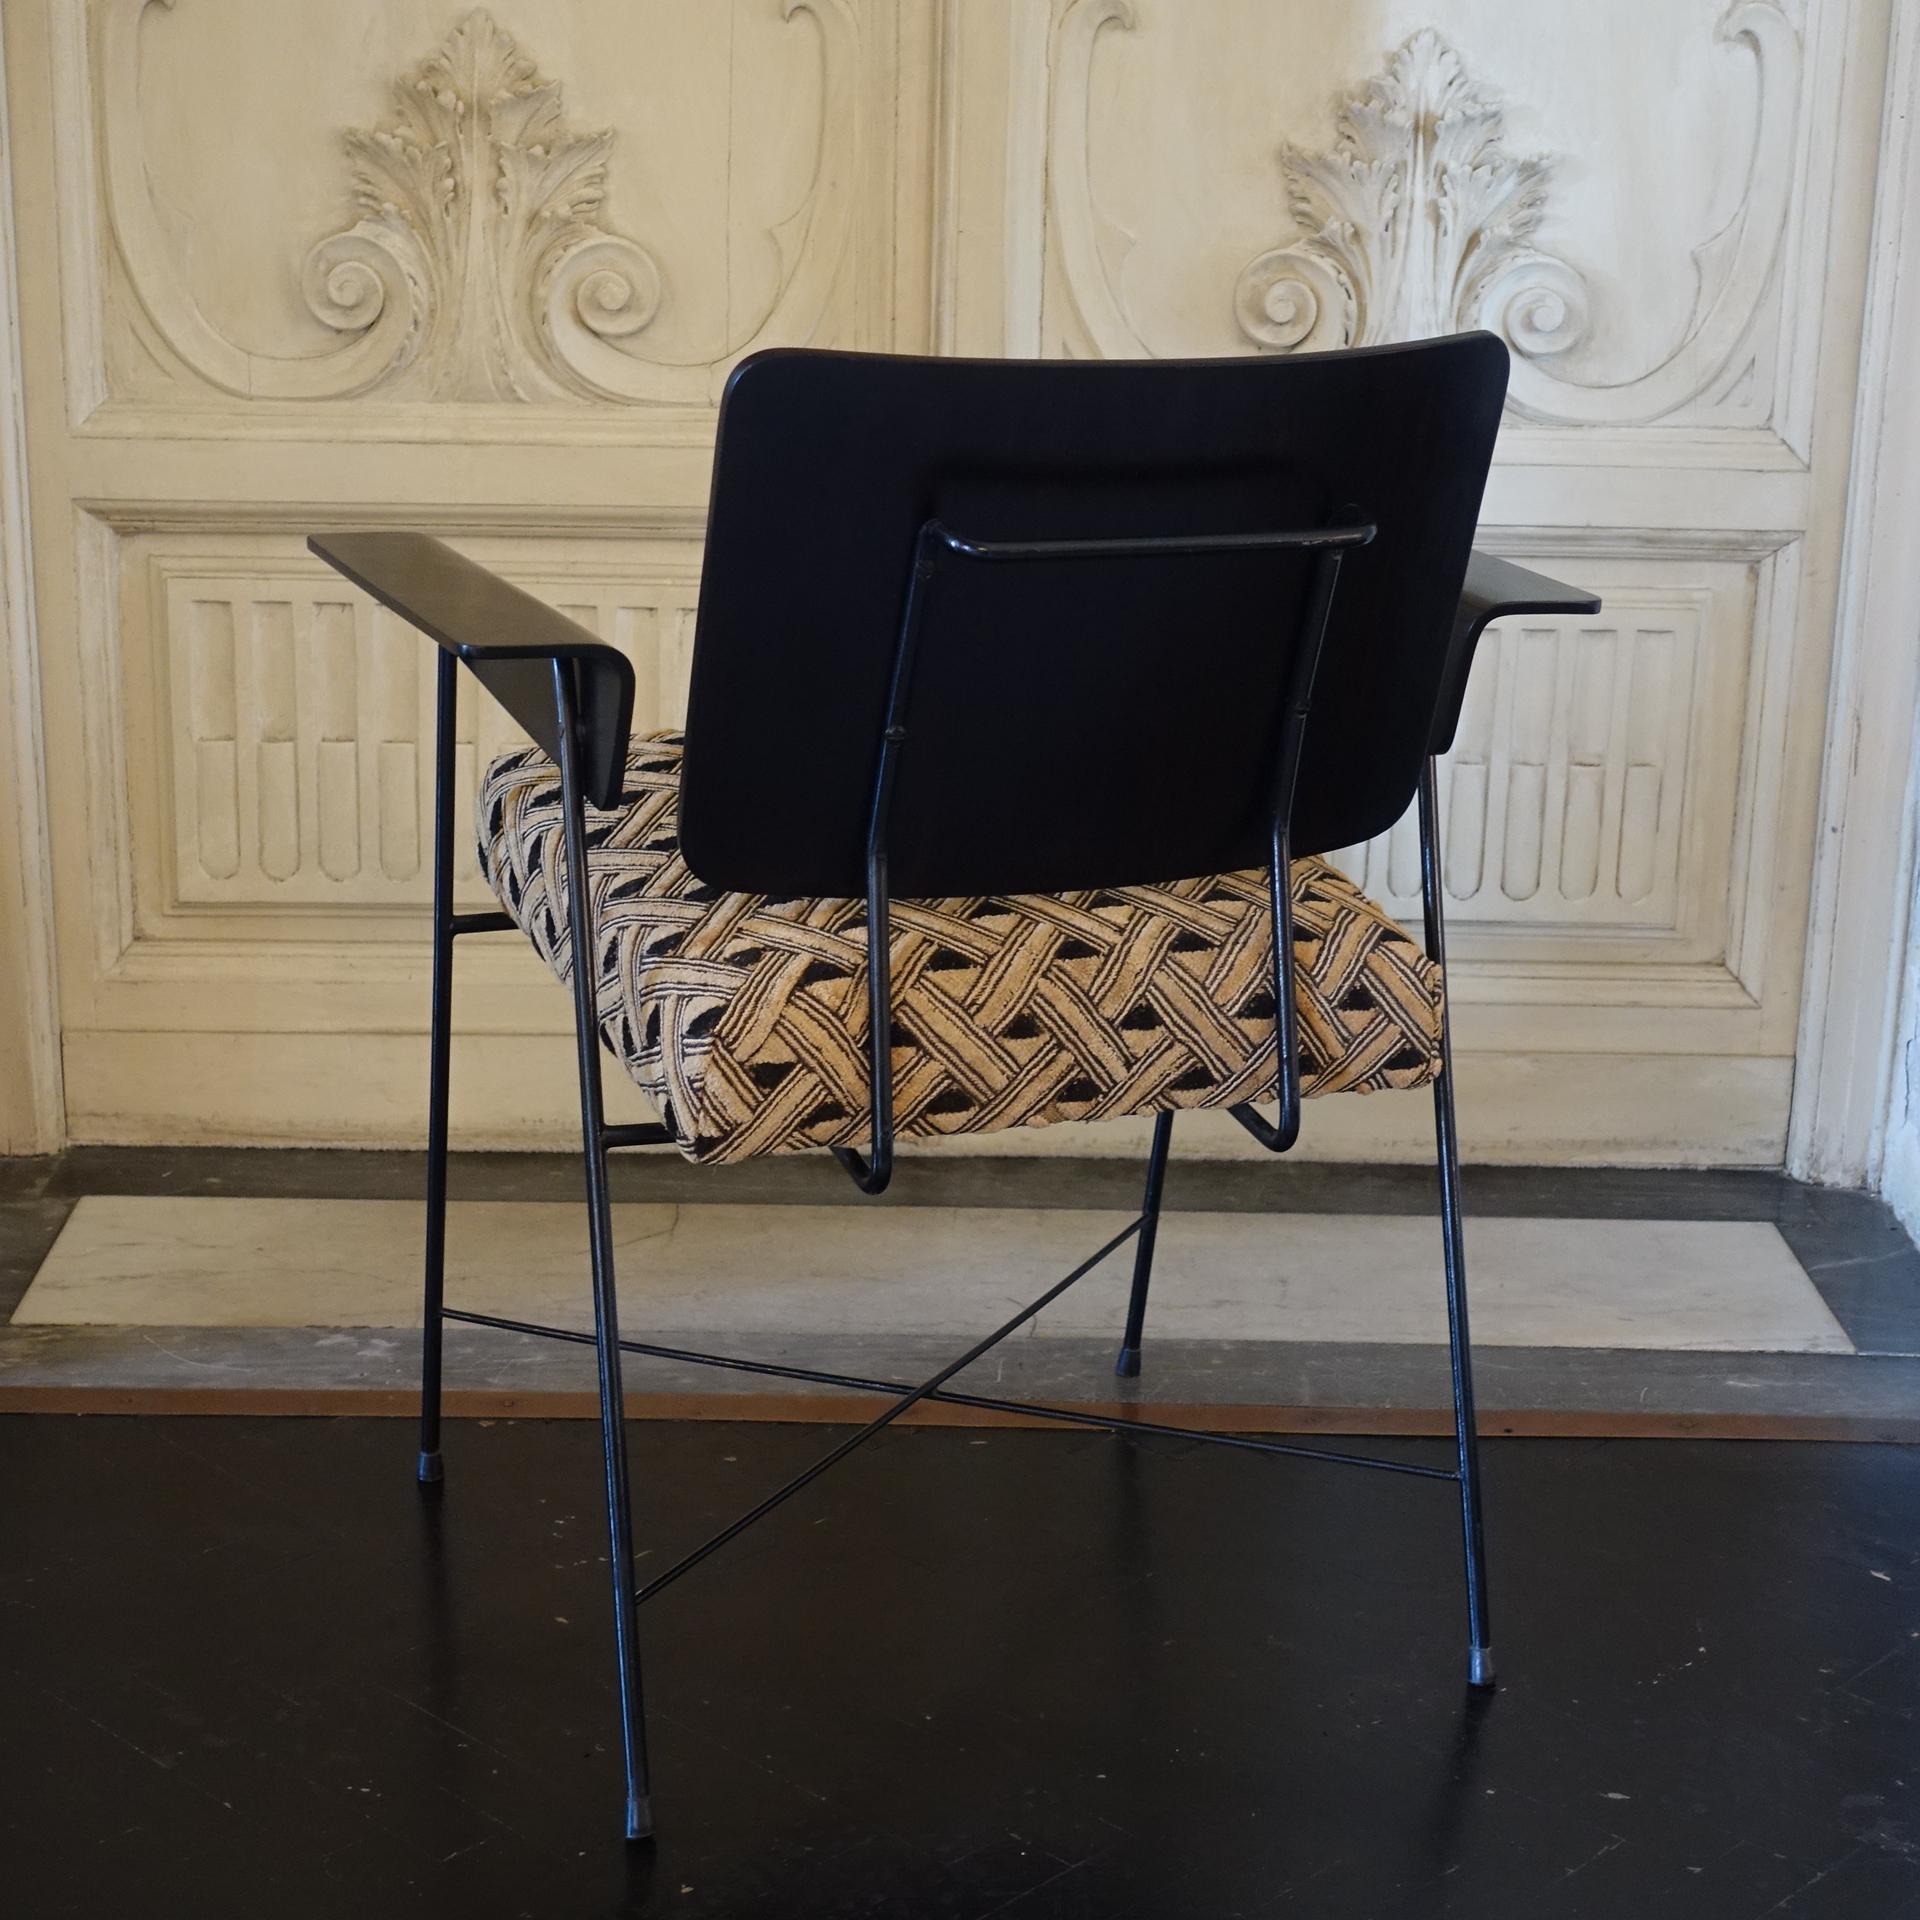 1950's Italian Armchair Black Wood and Steel, African Kuba Cloth Seat Cushion In Good Condition For Sale In Firenze, IT